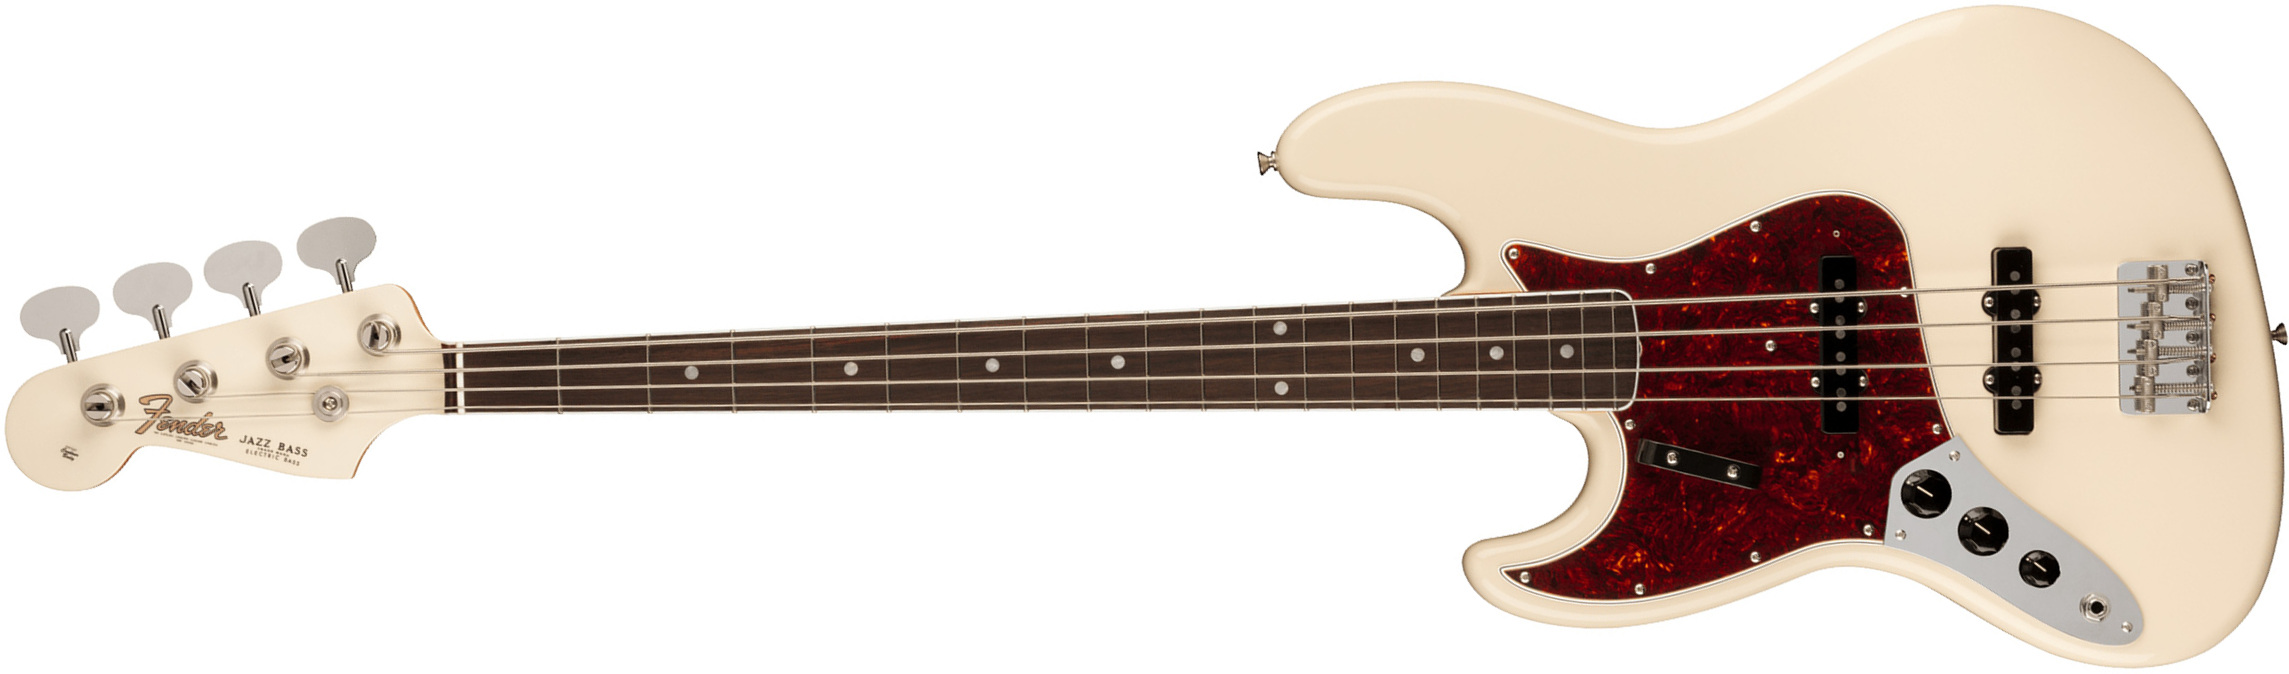 Fender Jazz Bass 1966 American Vintage Ii Lh Gaucher Usa Rw - Olympic White - Basse Électrique Solid Body - Main picture